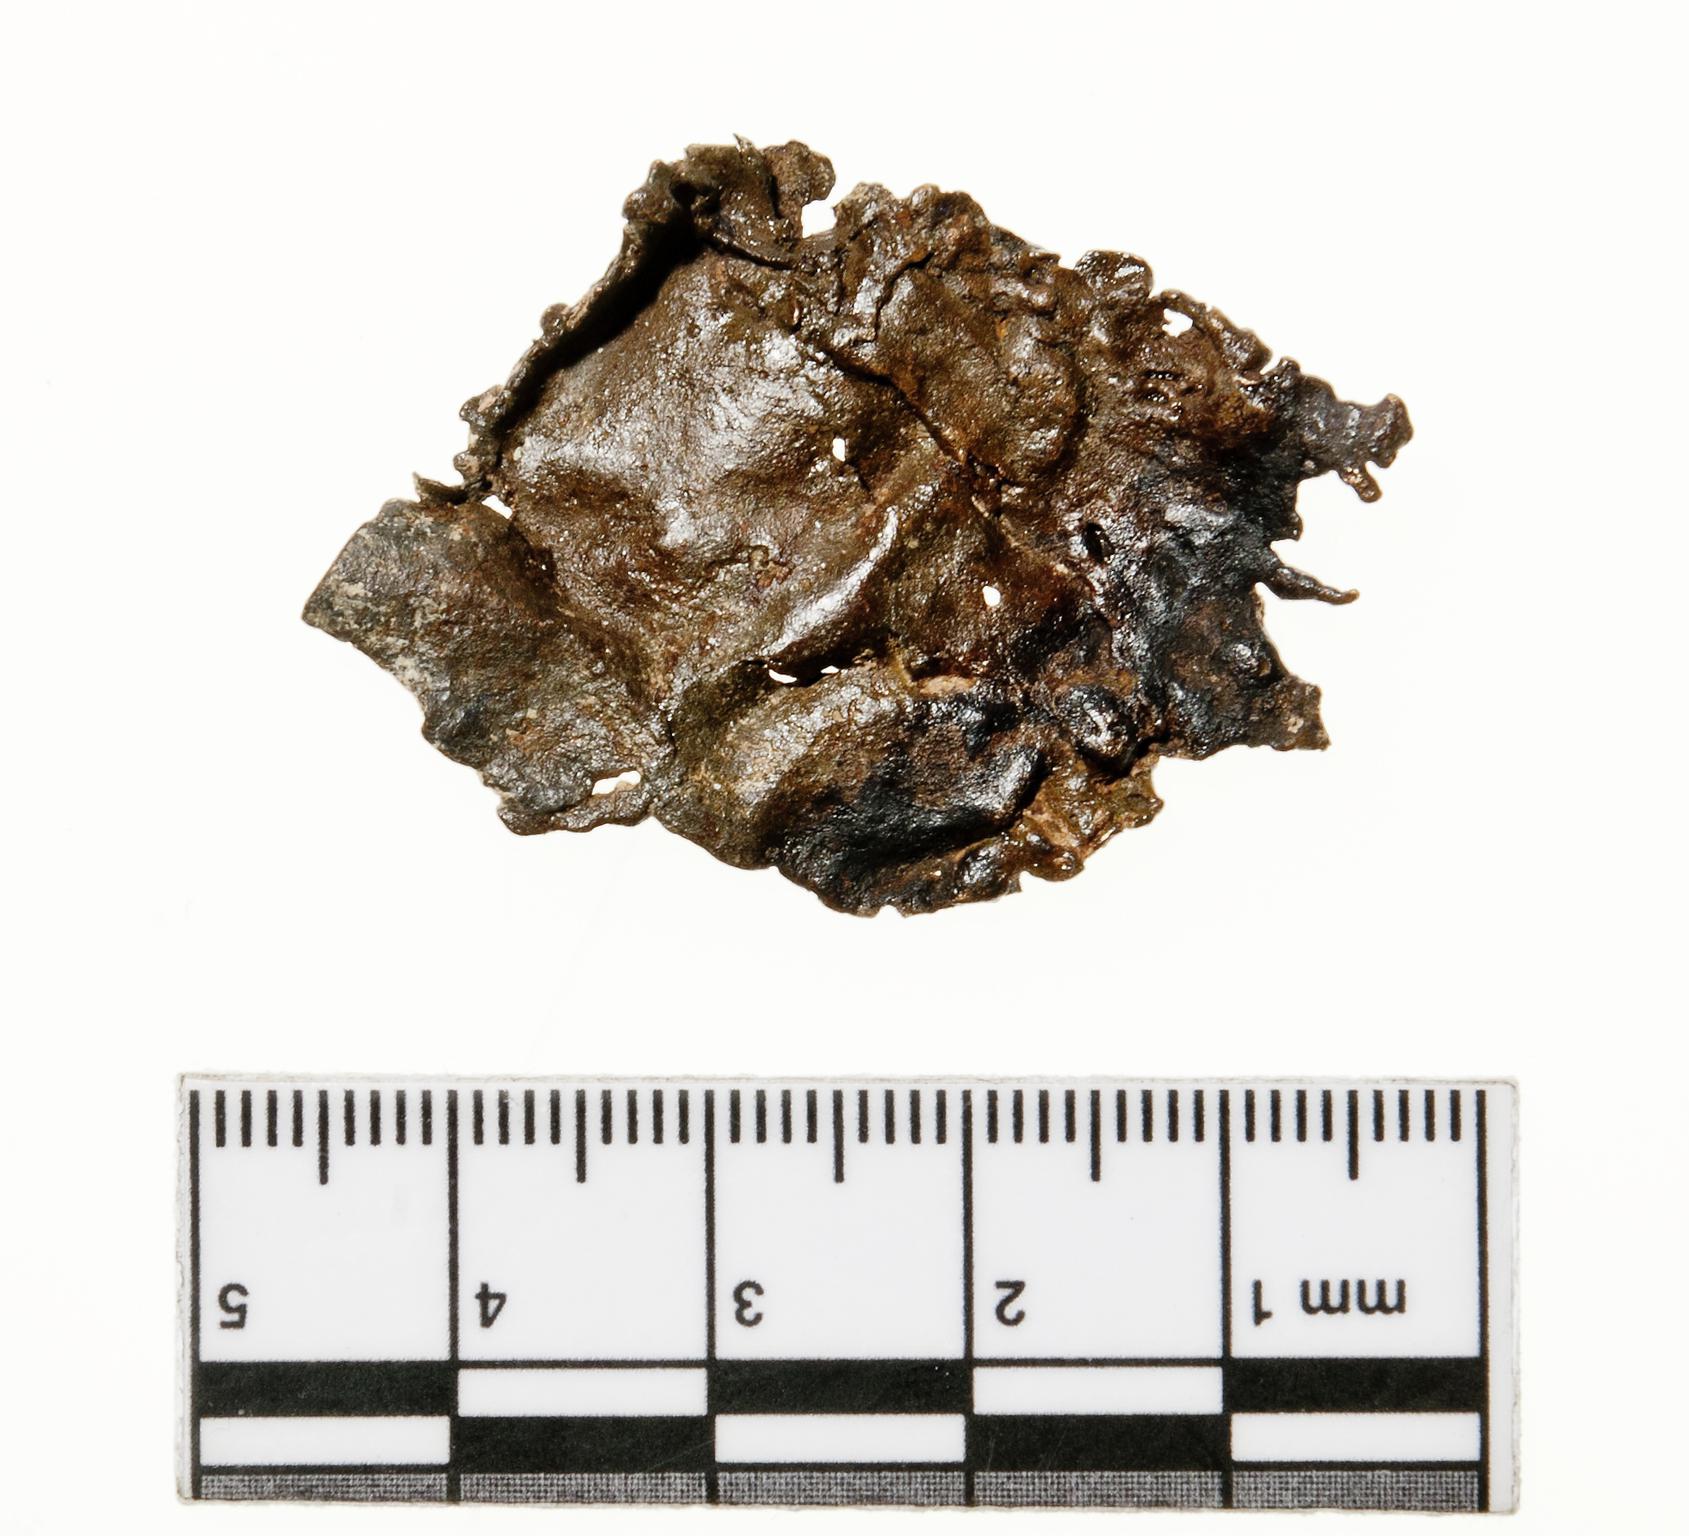 Early Medieval copper alloy waste